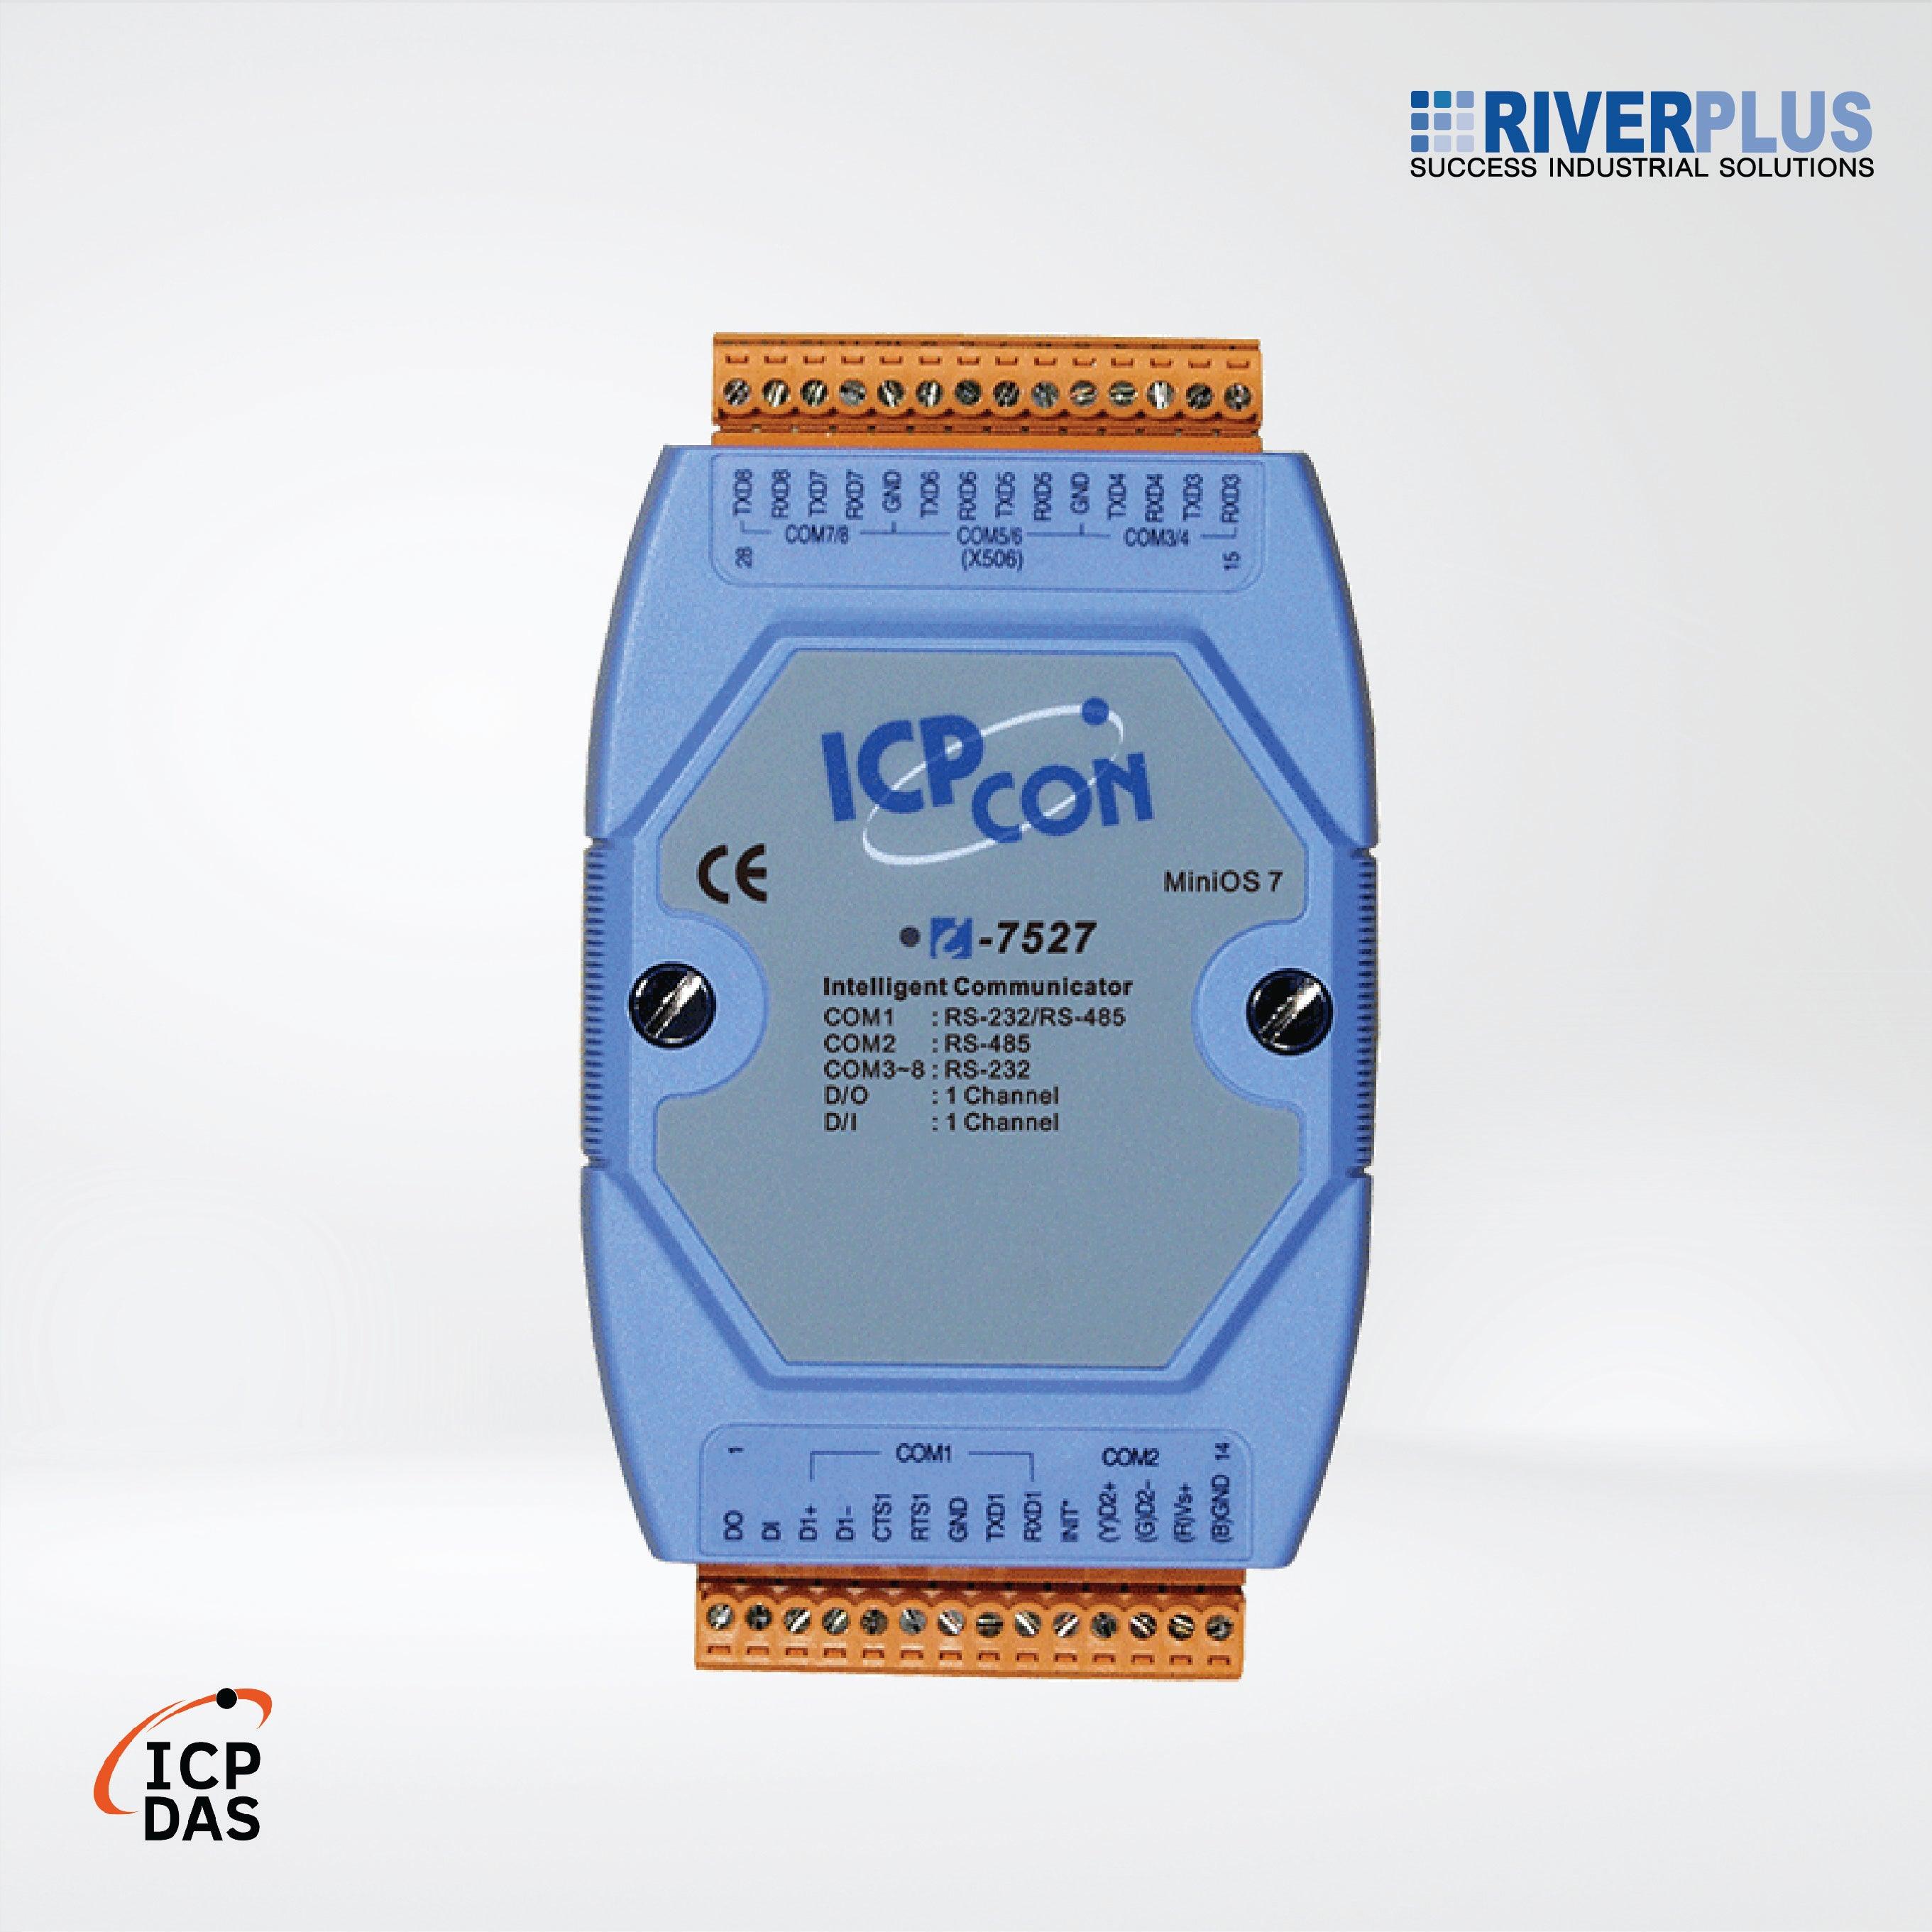 I-7527 Addressable RS-485 to 7 x RS-232/RS-485 Converter with 1 DI and 1 DO (Blue Cover) - Riverplus